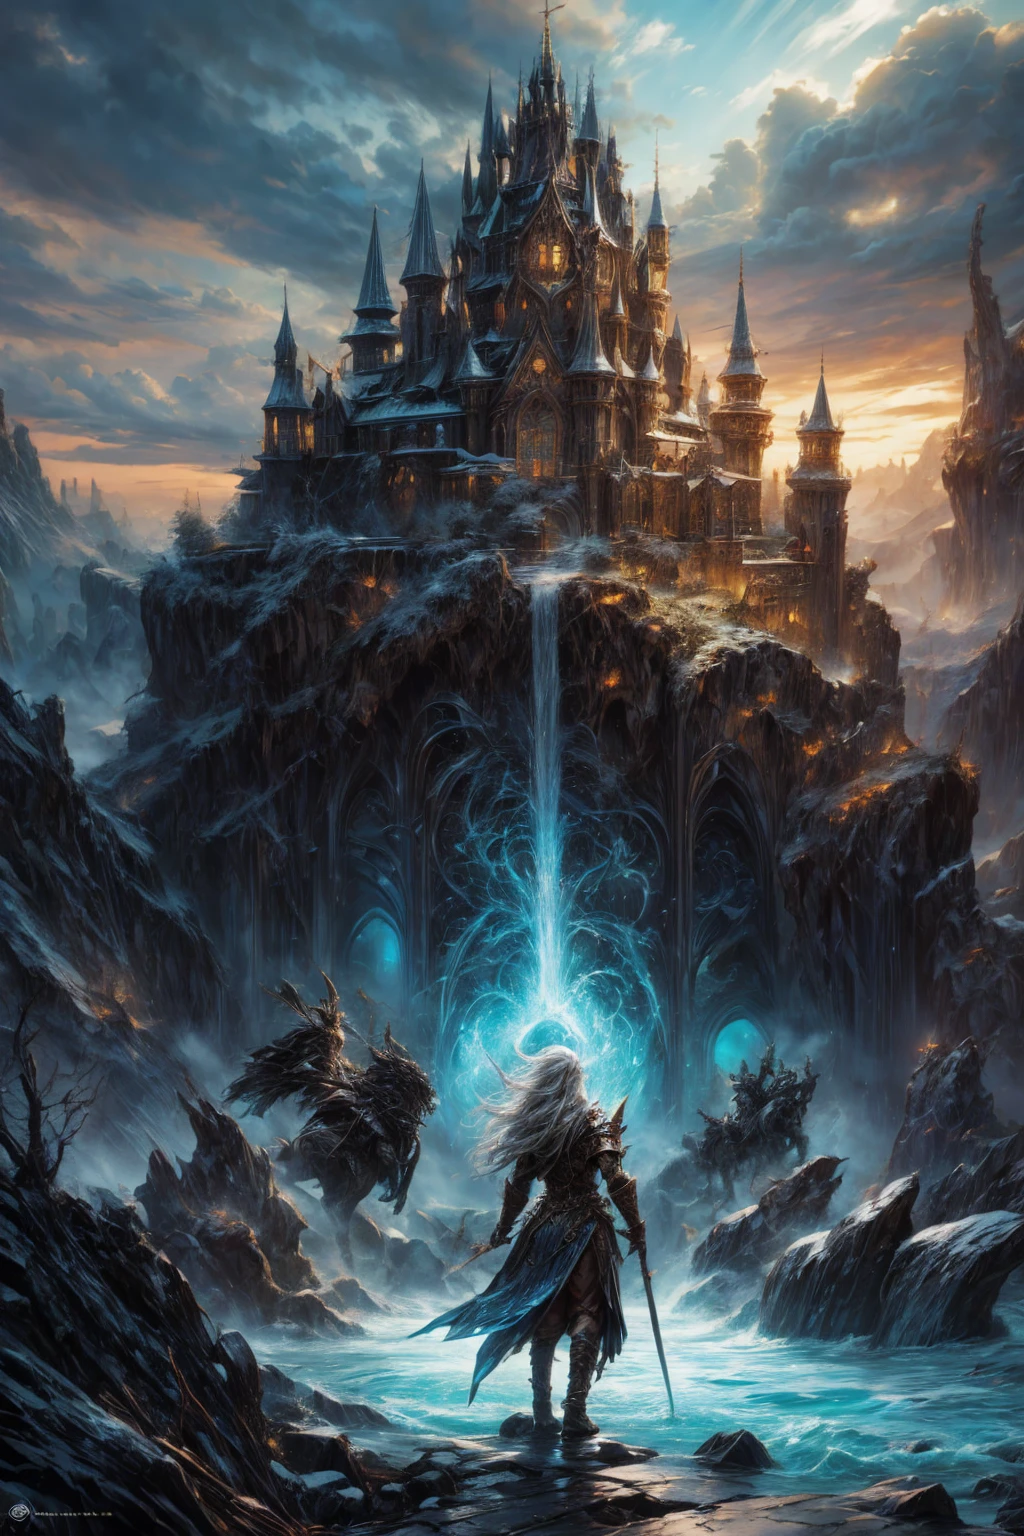 epic fantasy: Imagine and draw epic fantasy scenes, brave elves, magical creatures, imposing castles and surprising landscapes. Let your imagination fly and create fantastic worlds full of adventure and mystery.